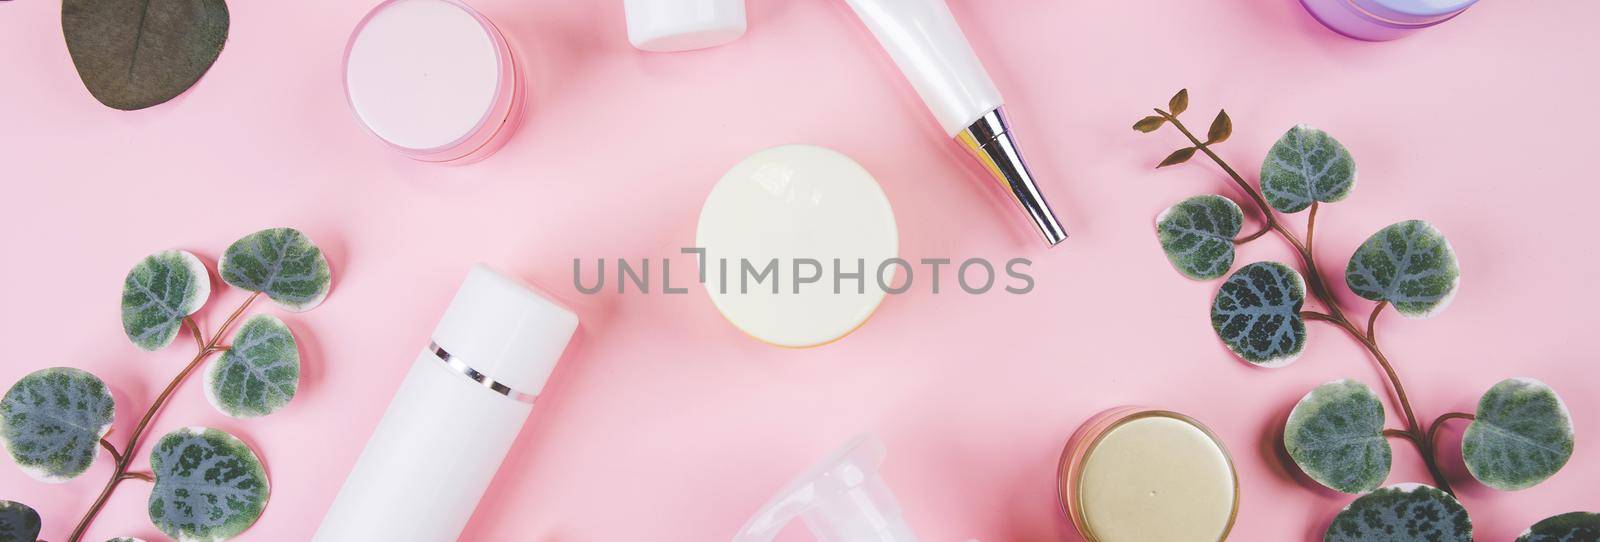 Mockup cosmetic bottle with cream or lotion and leaf isolated on pink background, mock up package for advertising, skincare or cosmetology, top view, flat lay, skin care and treatment with product.